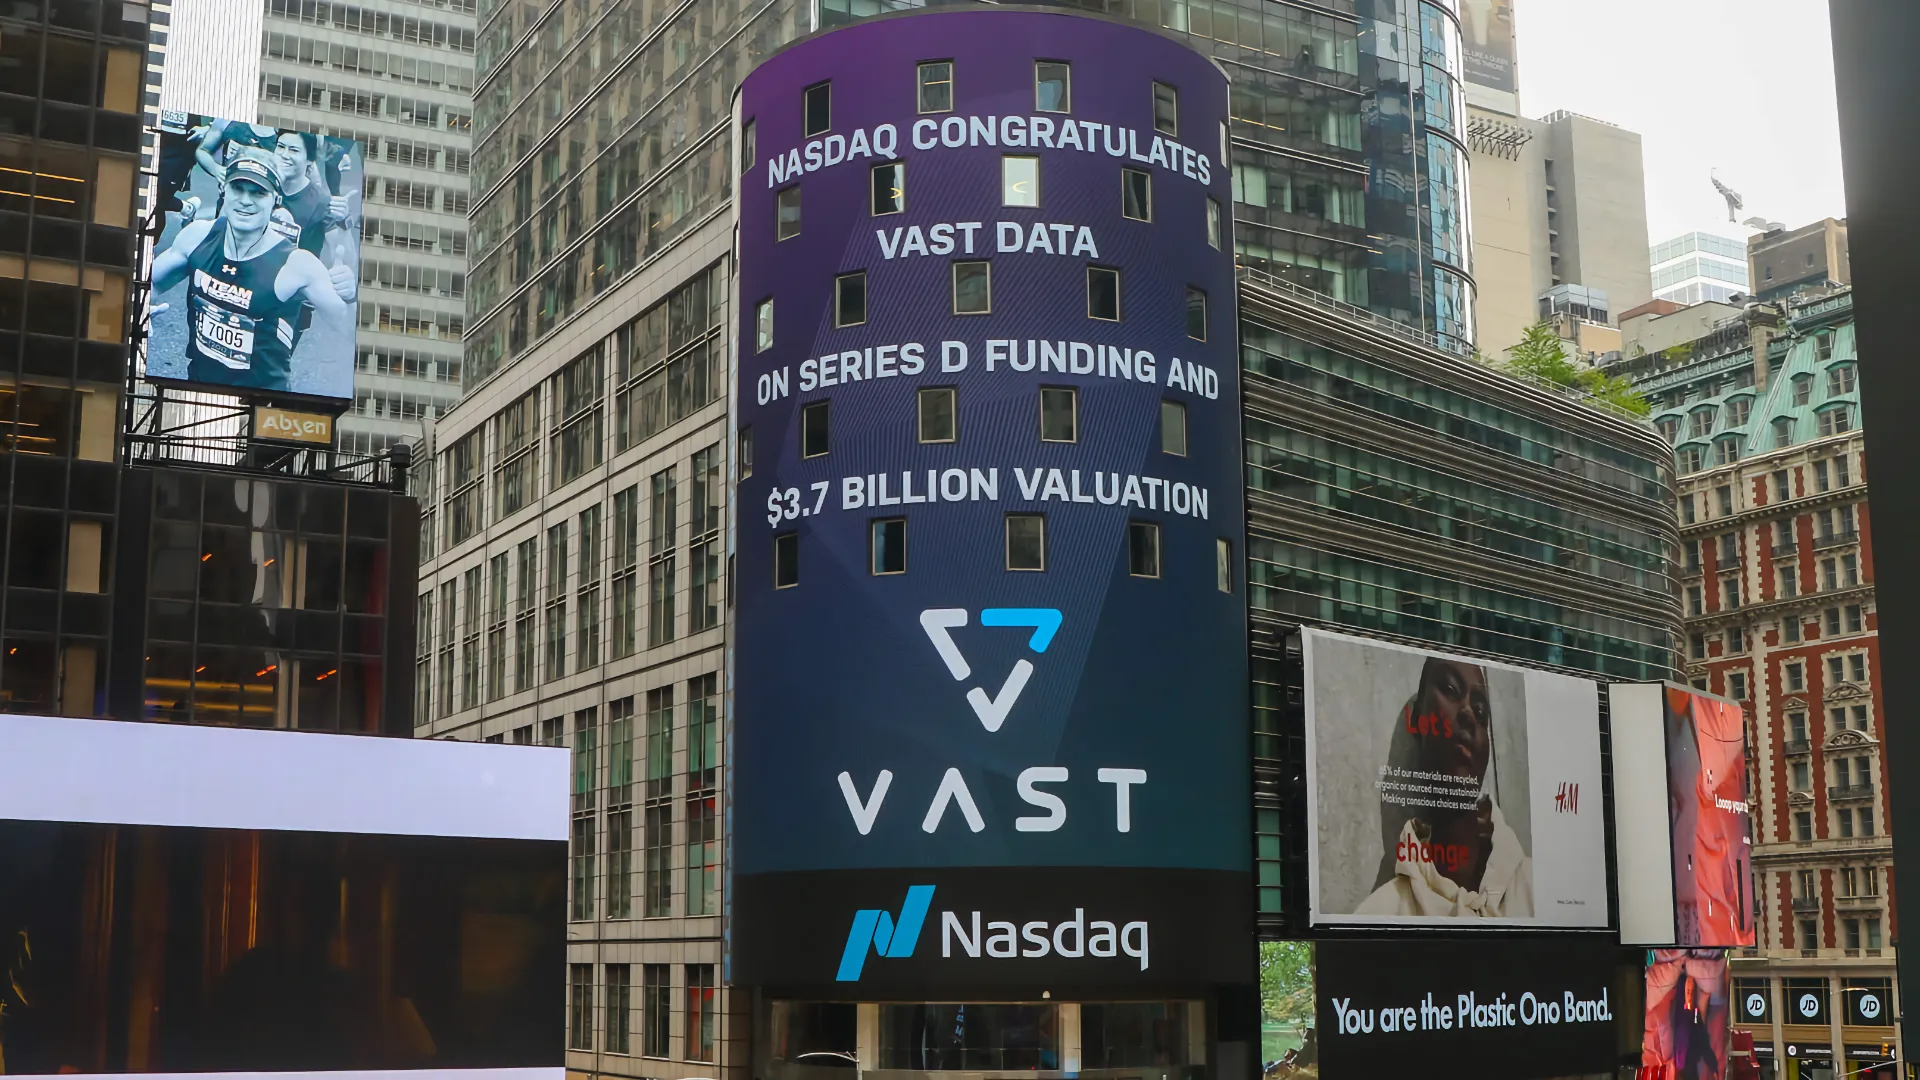 VAST Data Triples Valuation in One Year to $3.7 Billion